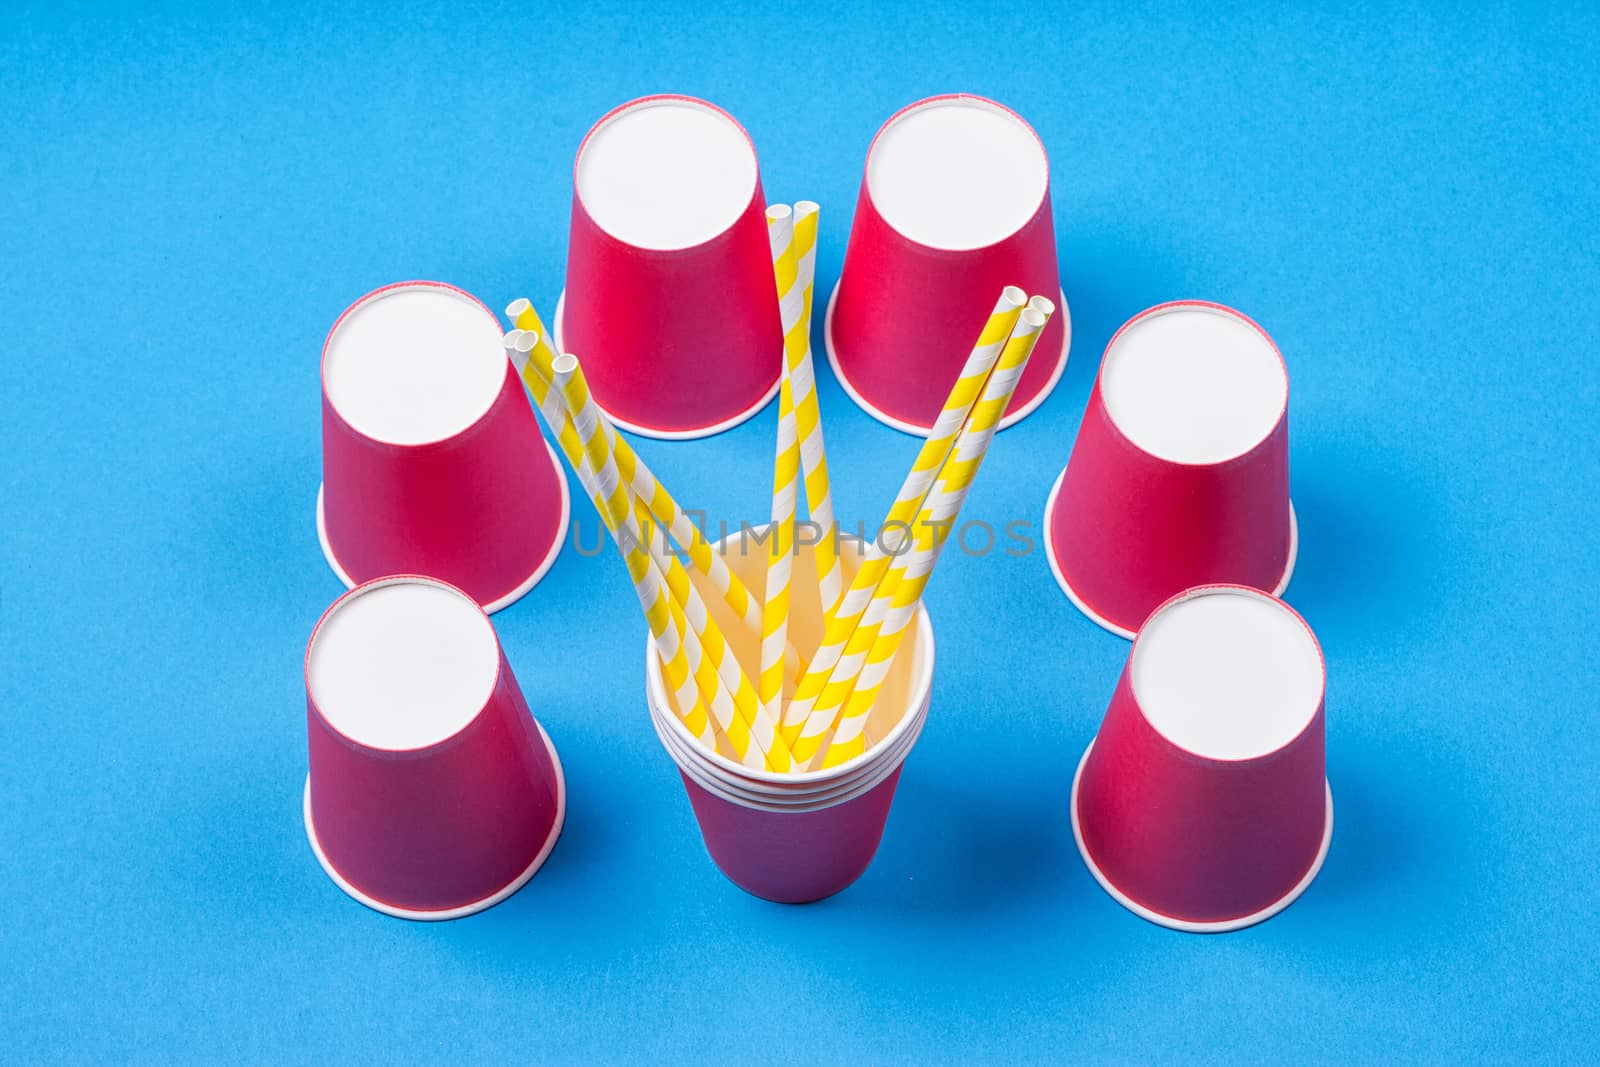 a bundle of multi-colored drinking straws in a paper Cup on a blue background. fashion minimal. flat lay